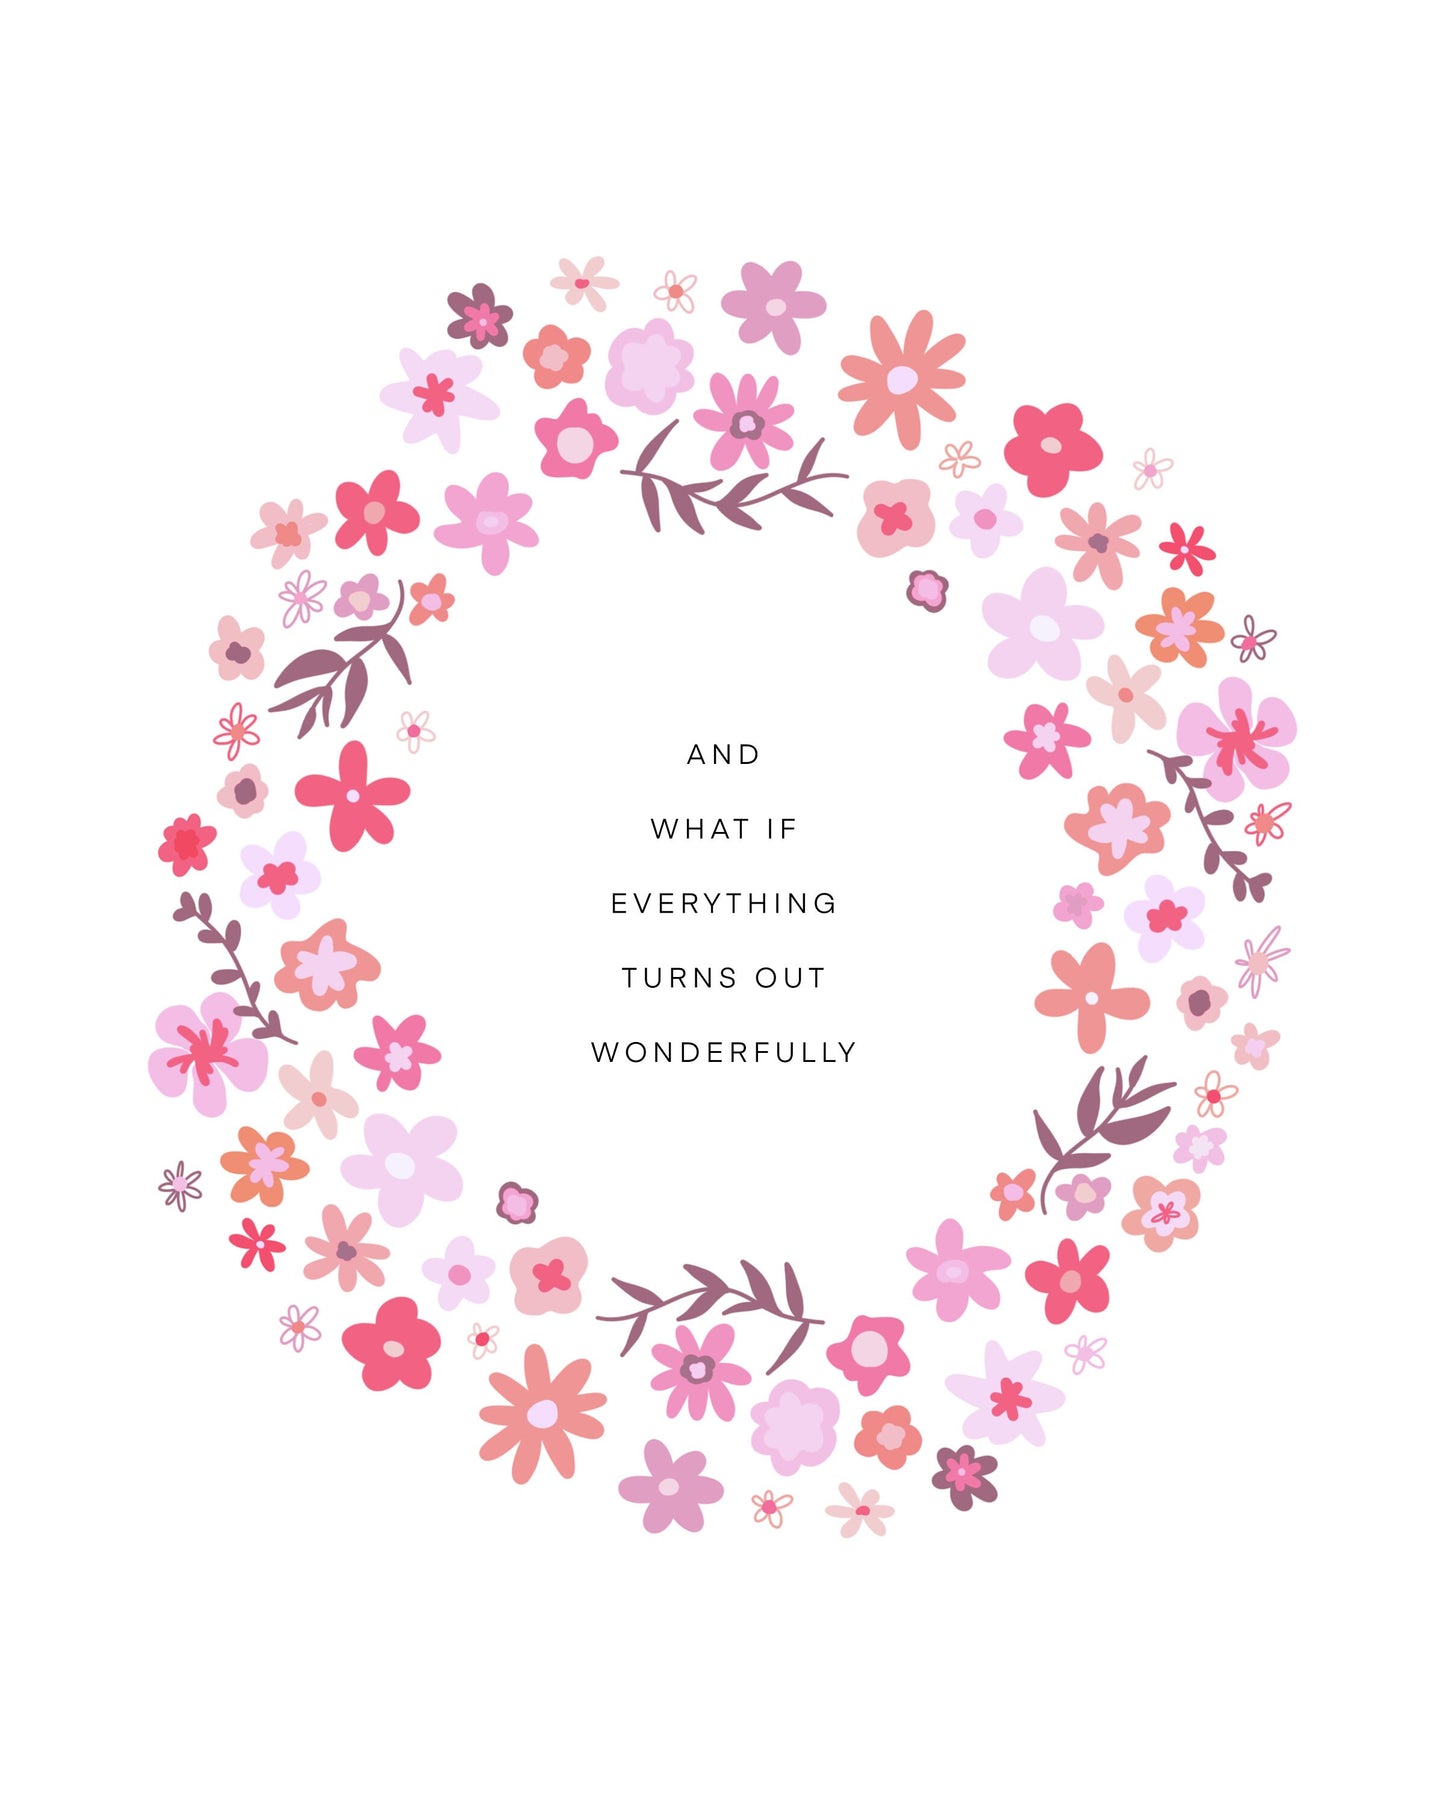 And What if Everything Turns Out Wonderfully Flower Wreath || Inspirational || Quote Art || Inspirational Quote ||| 8x10 Print Unframed